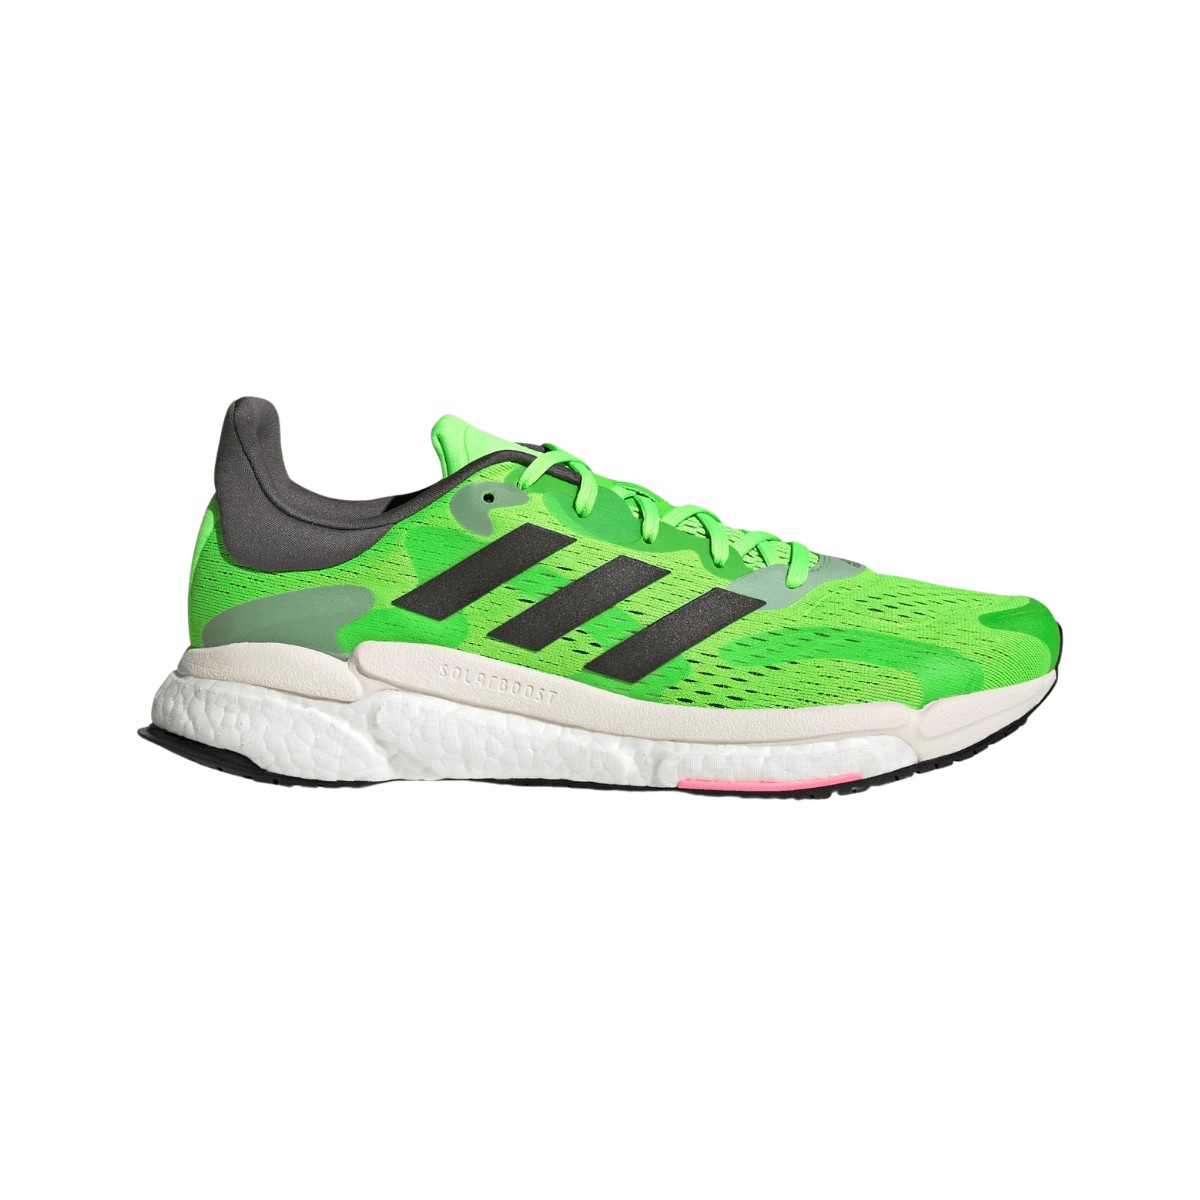 Adidas Solar Boost 4 Shoes Green Gray AW22, Size UK 11.5